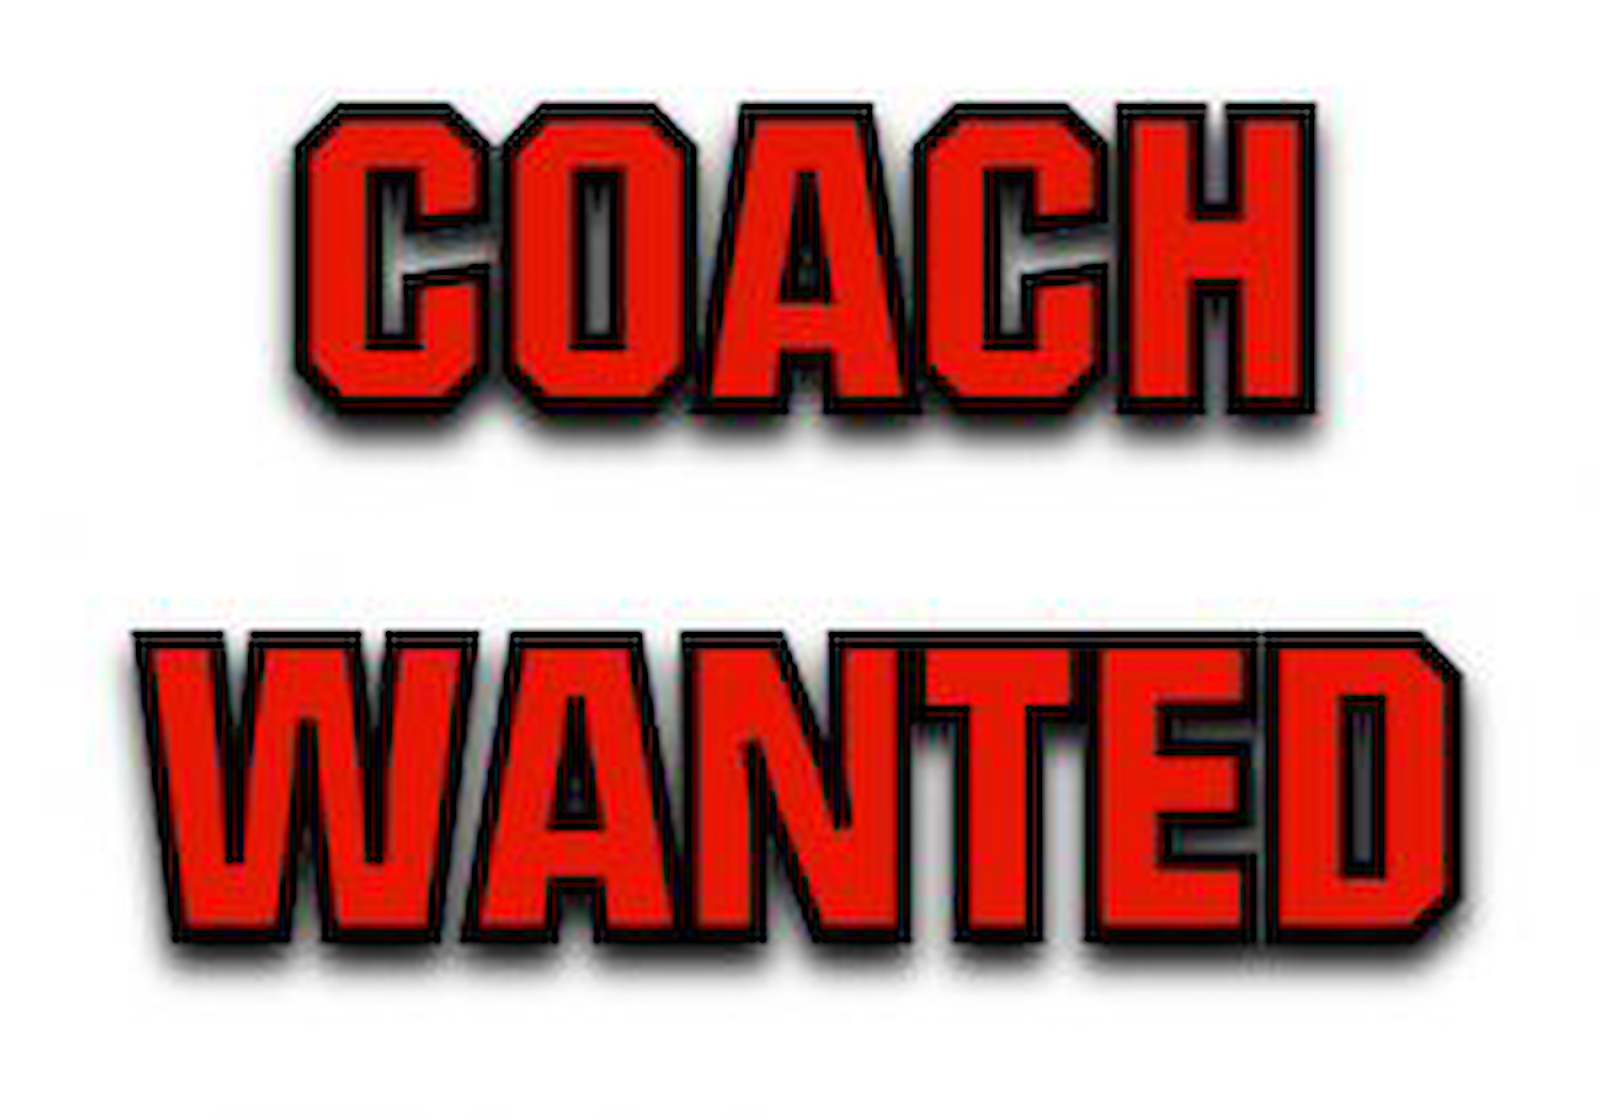 Coach Wanted.png